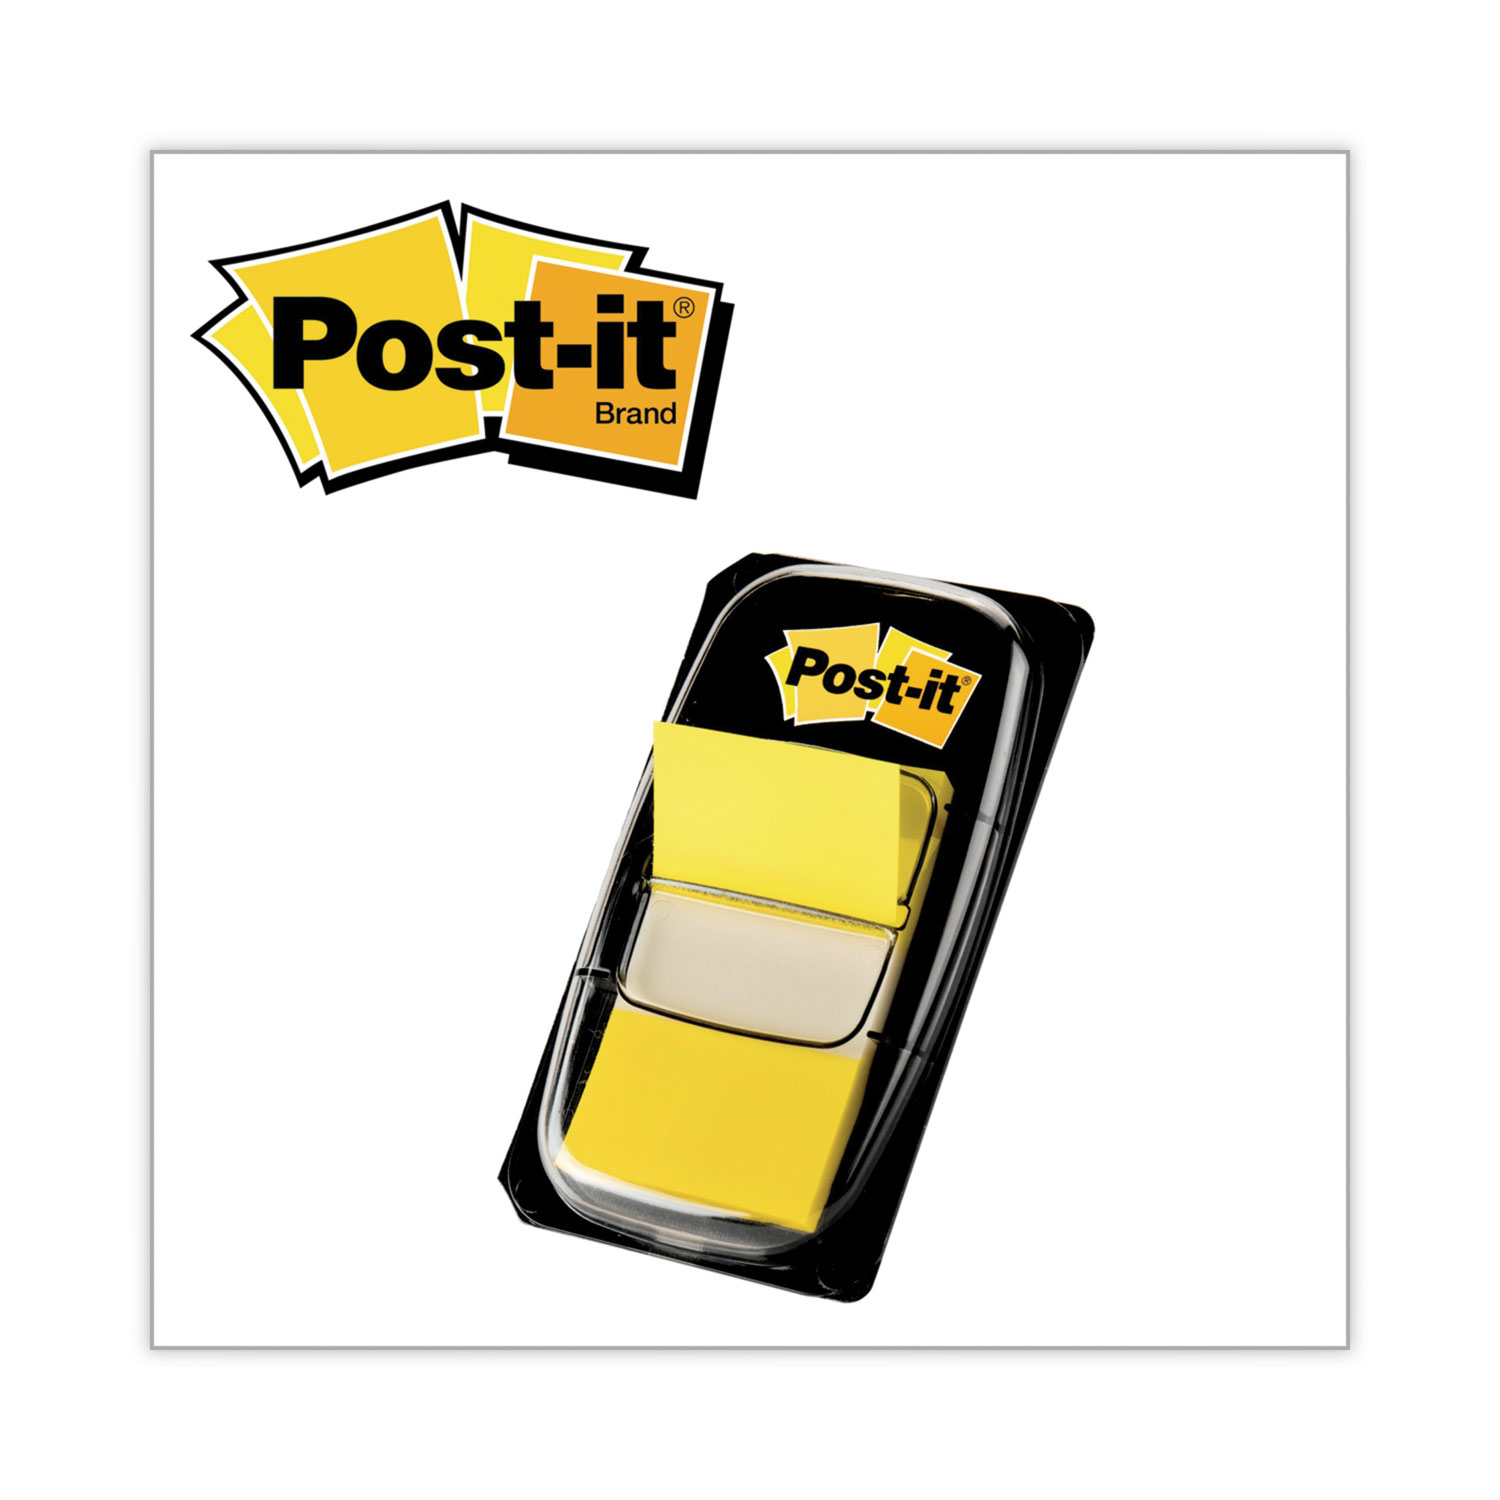 12 50-Flag Dispensers/Box Post-it 680YW12 Marking Page Flags in Dispensers Yellow